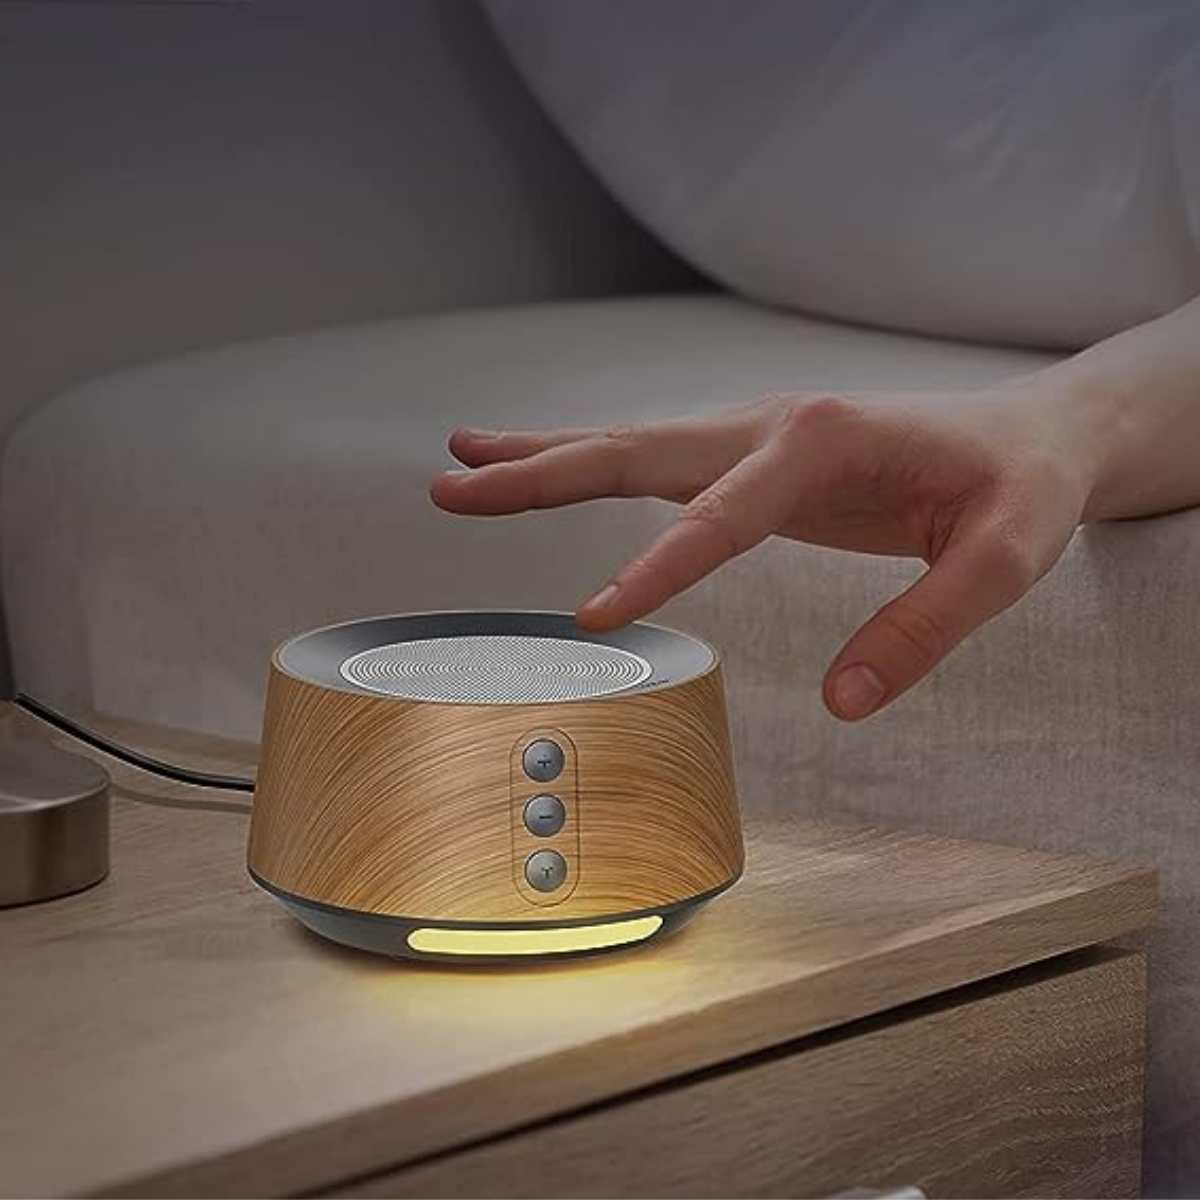 37 Home Gadgets So Advanced, They'll Make You Feel Time-Traveled